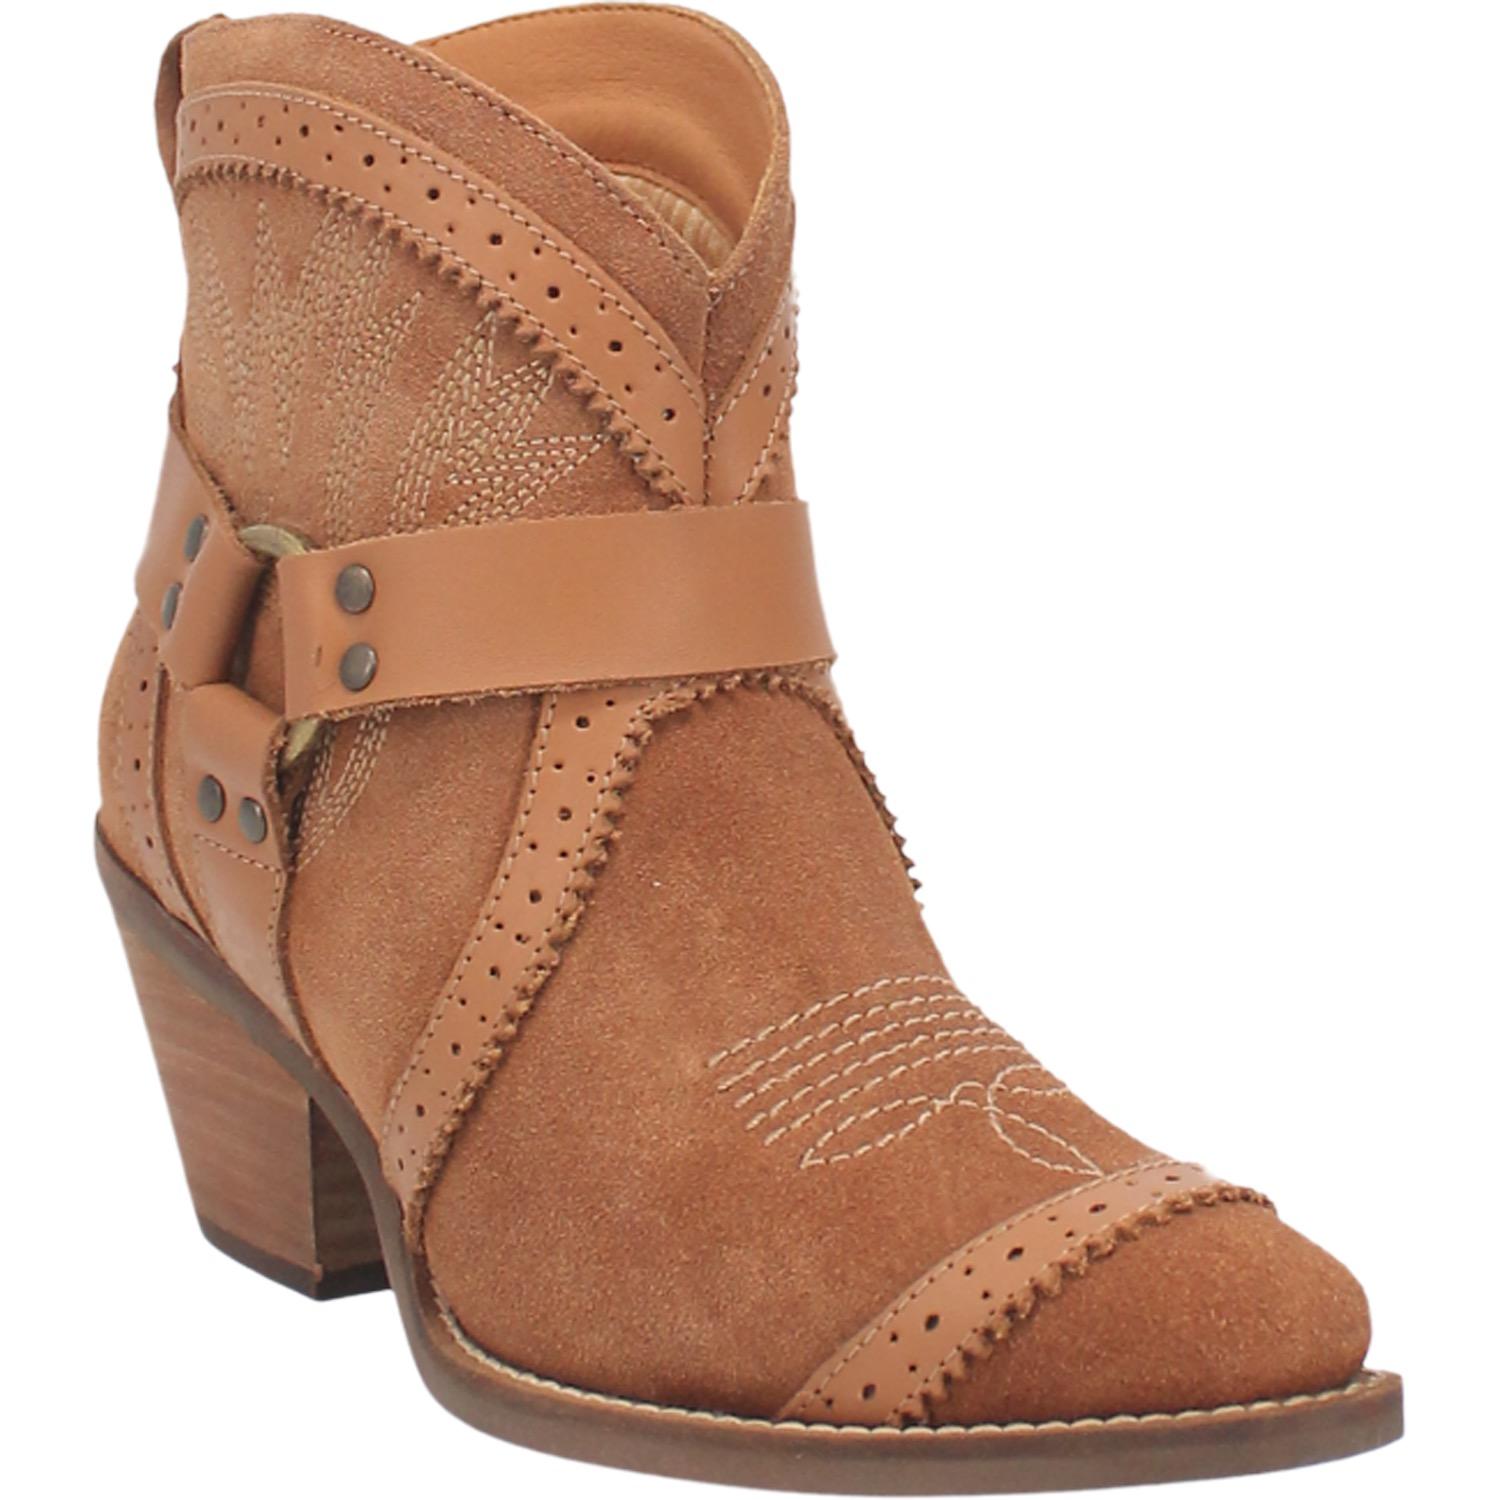 Gummy Bear Camel Suede Leather Booties w/ Embroidered Designs (DS)